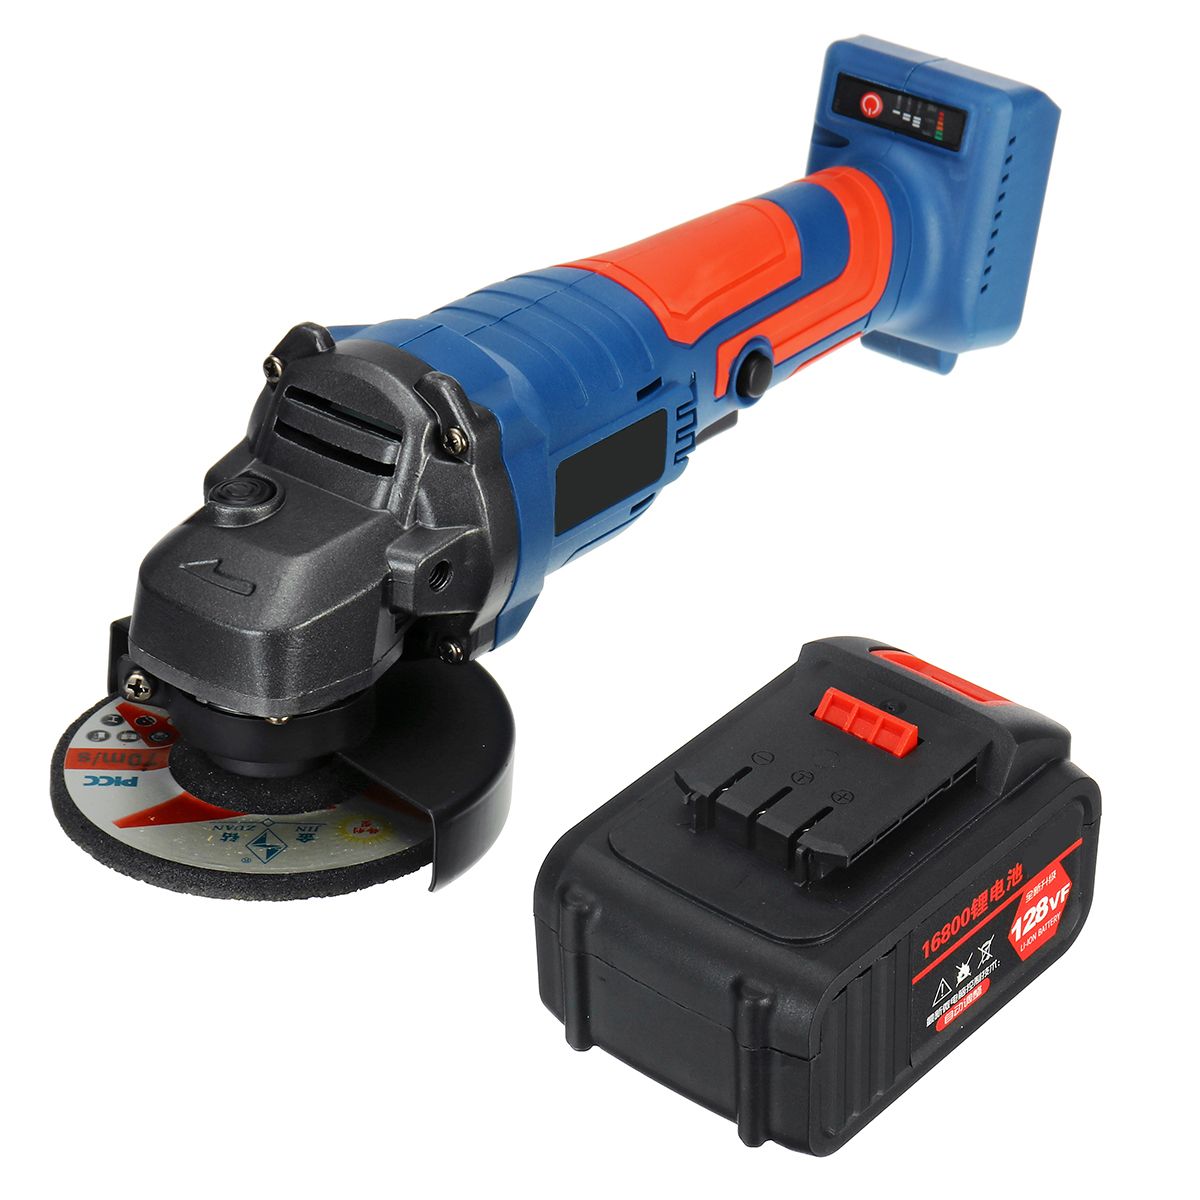 128VF-100mm-Cordless-Brushless-Angle-Grinder-Cutting-Grinding-Tool-Rechargeable-1661352